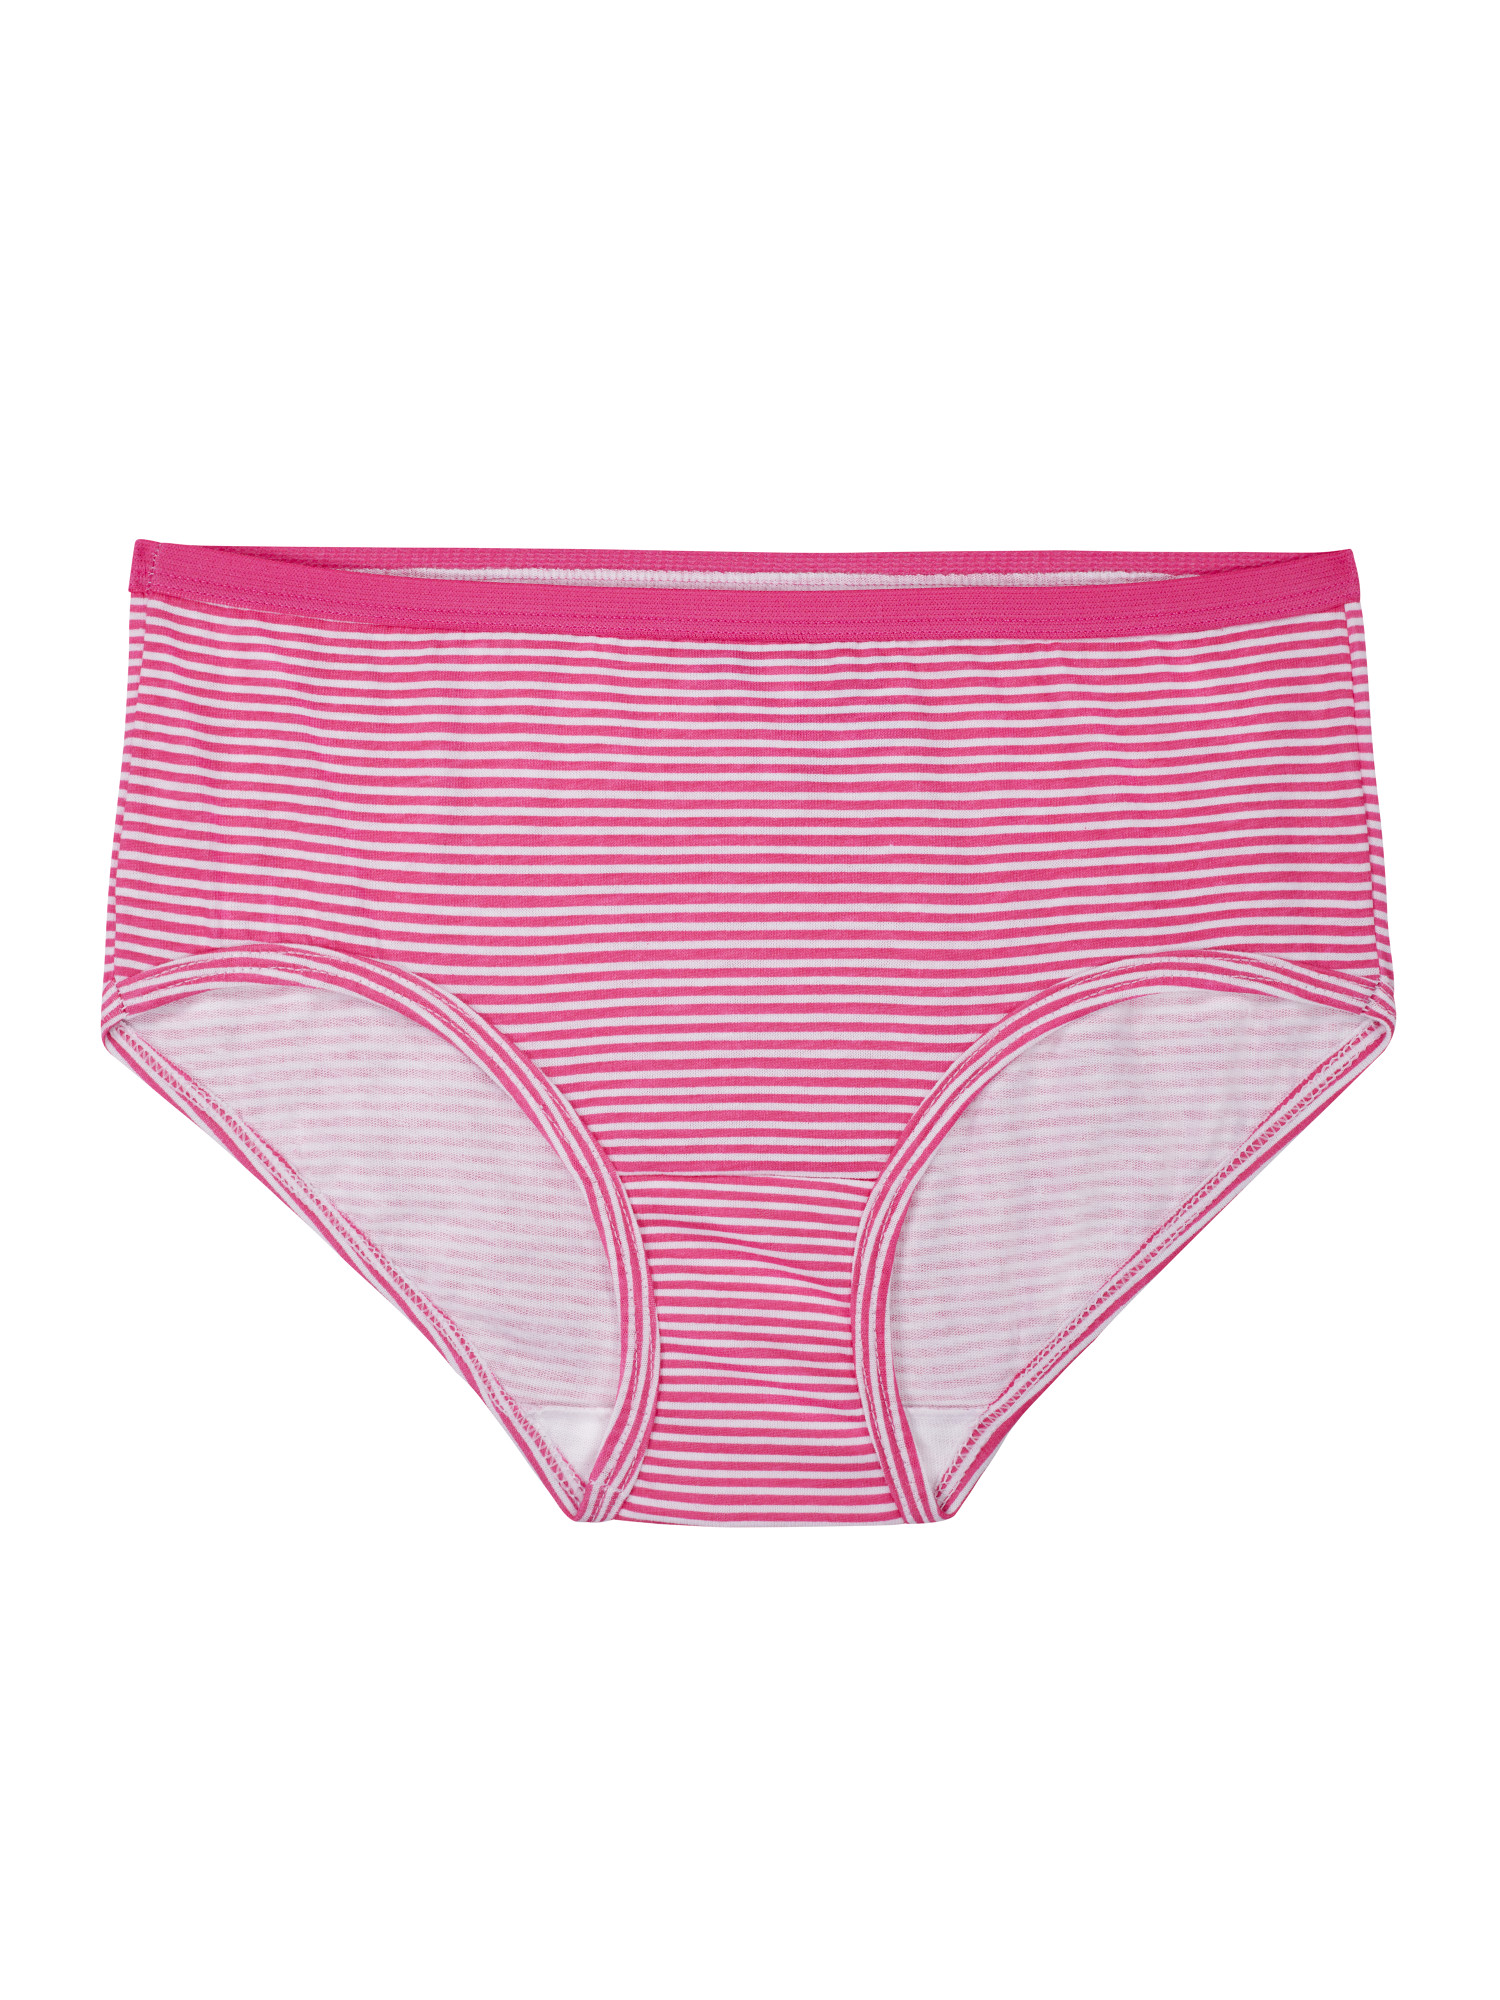 Fruit of the Loom Girls' Cotton Brief Underwear, 14 Pack - image 5 of 13